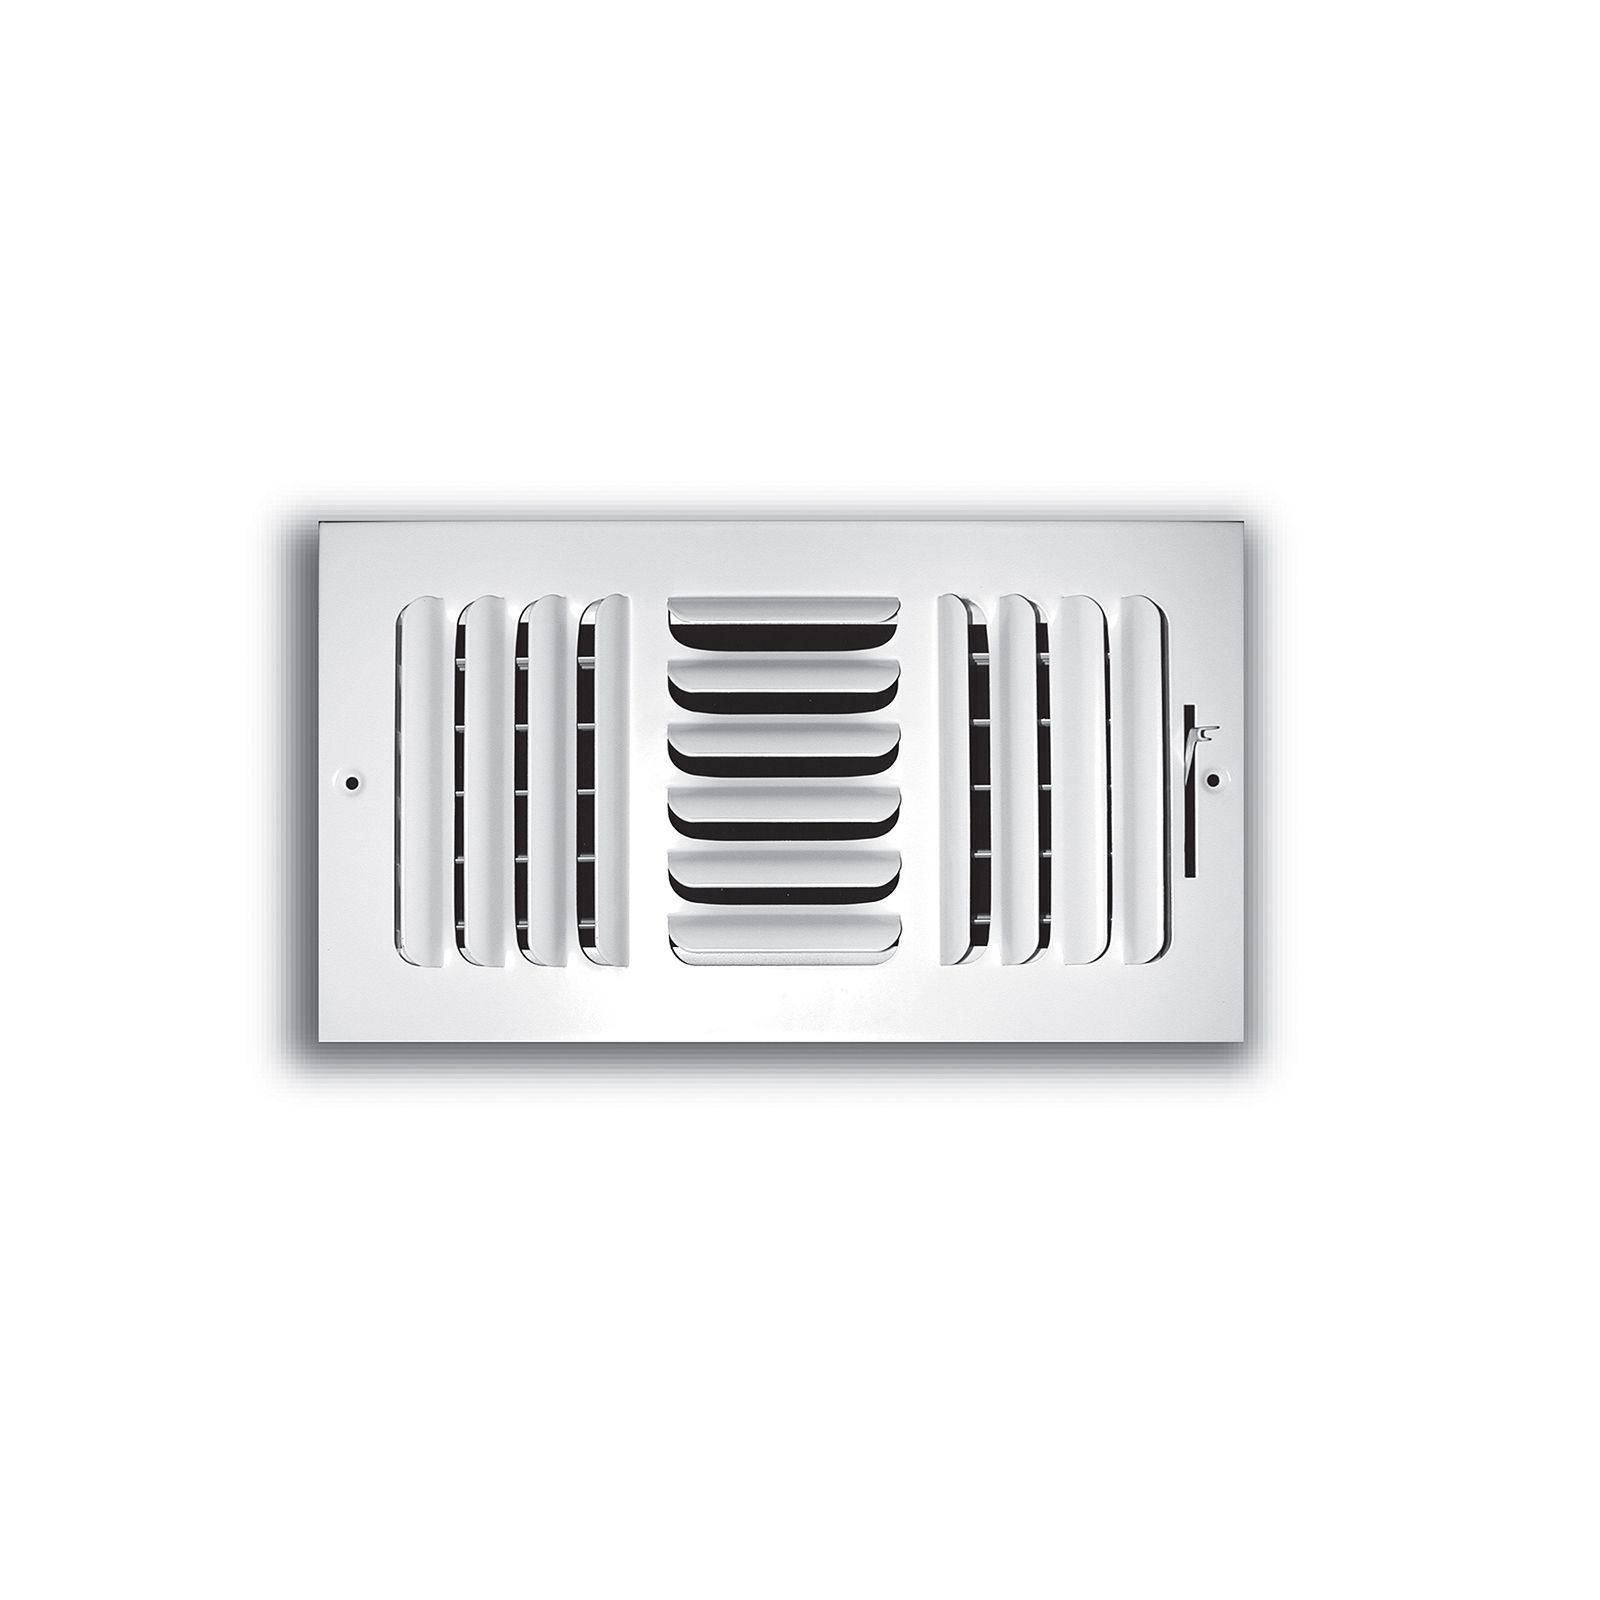 TRUaire 403M 12X04 - Fixed Curved Blade Wall/Ceiling Register With Multi Shutter Damper, 3-Way, White, 12" X 04"